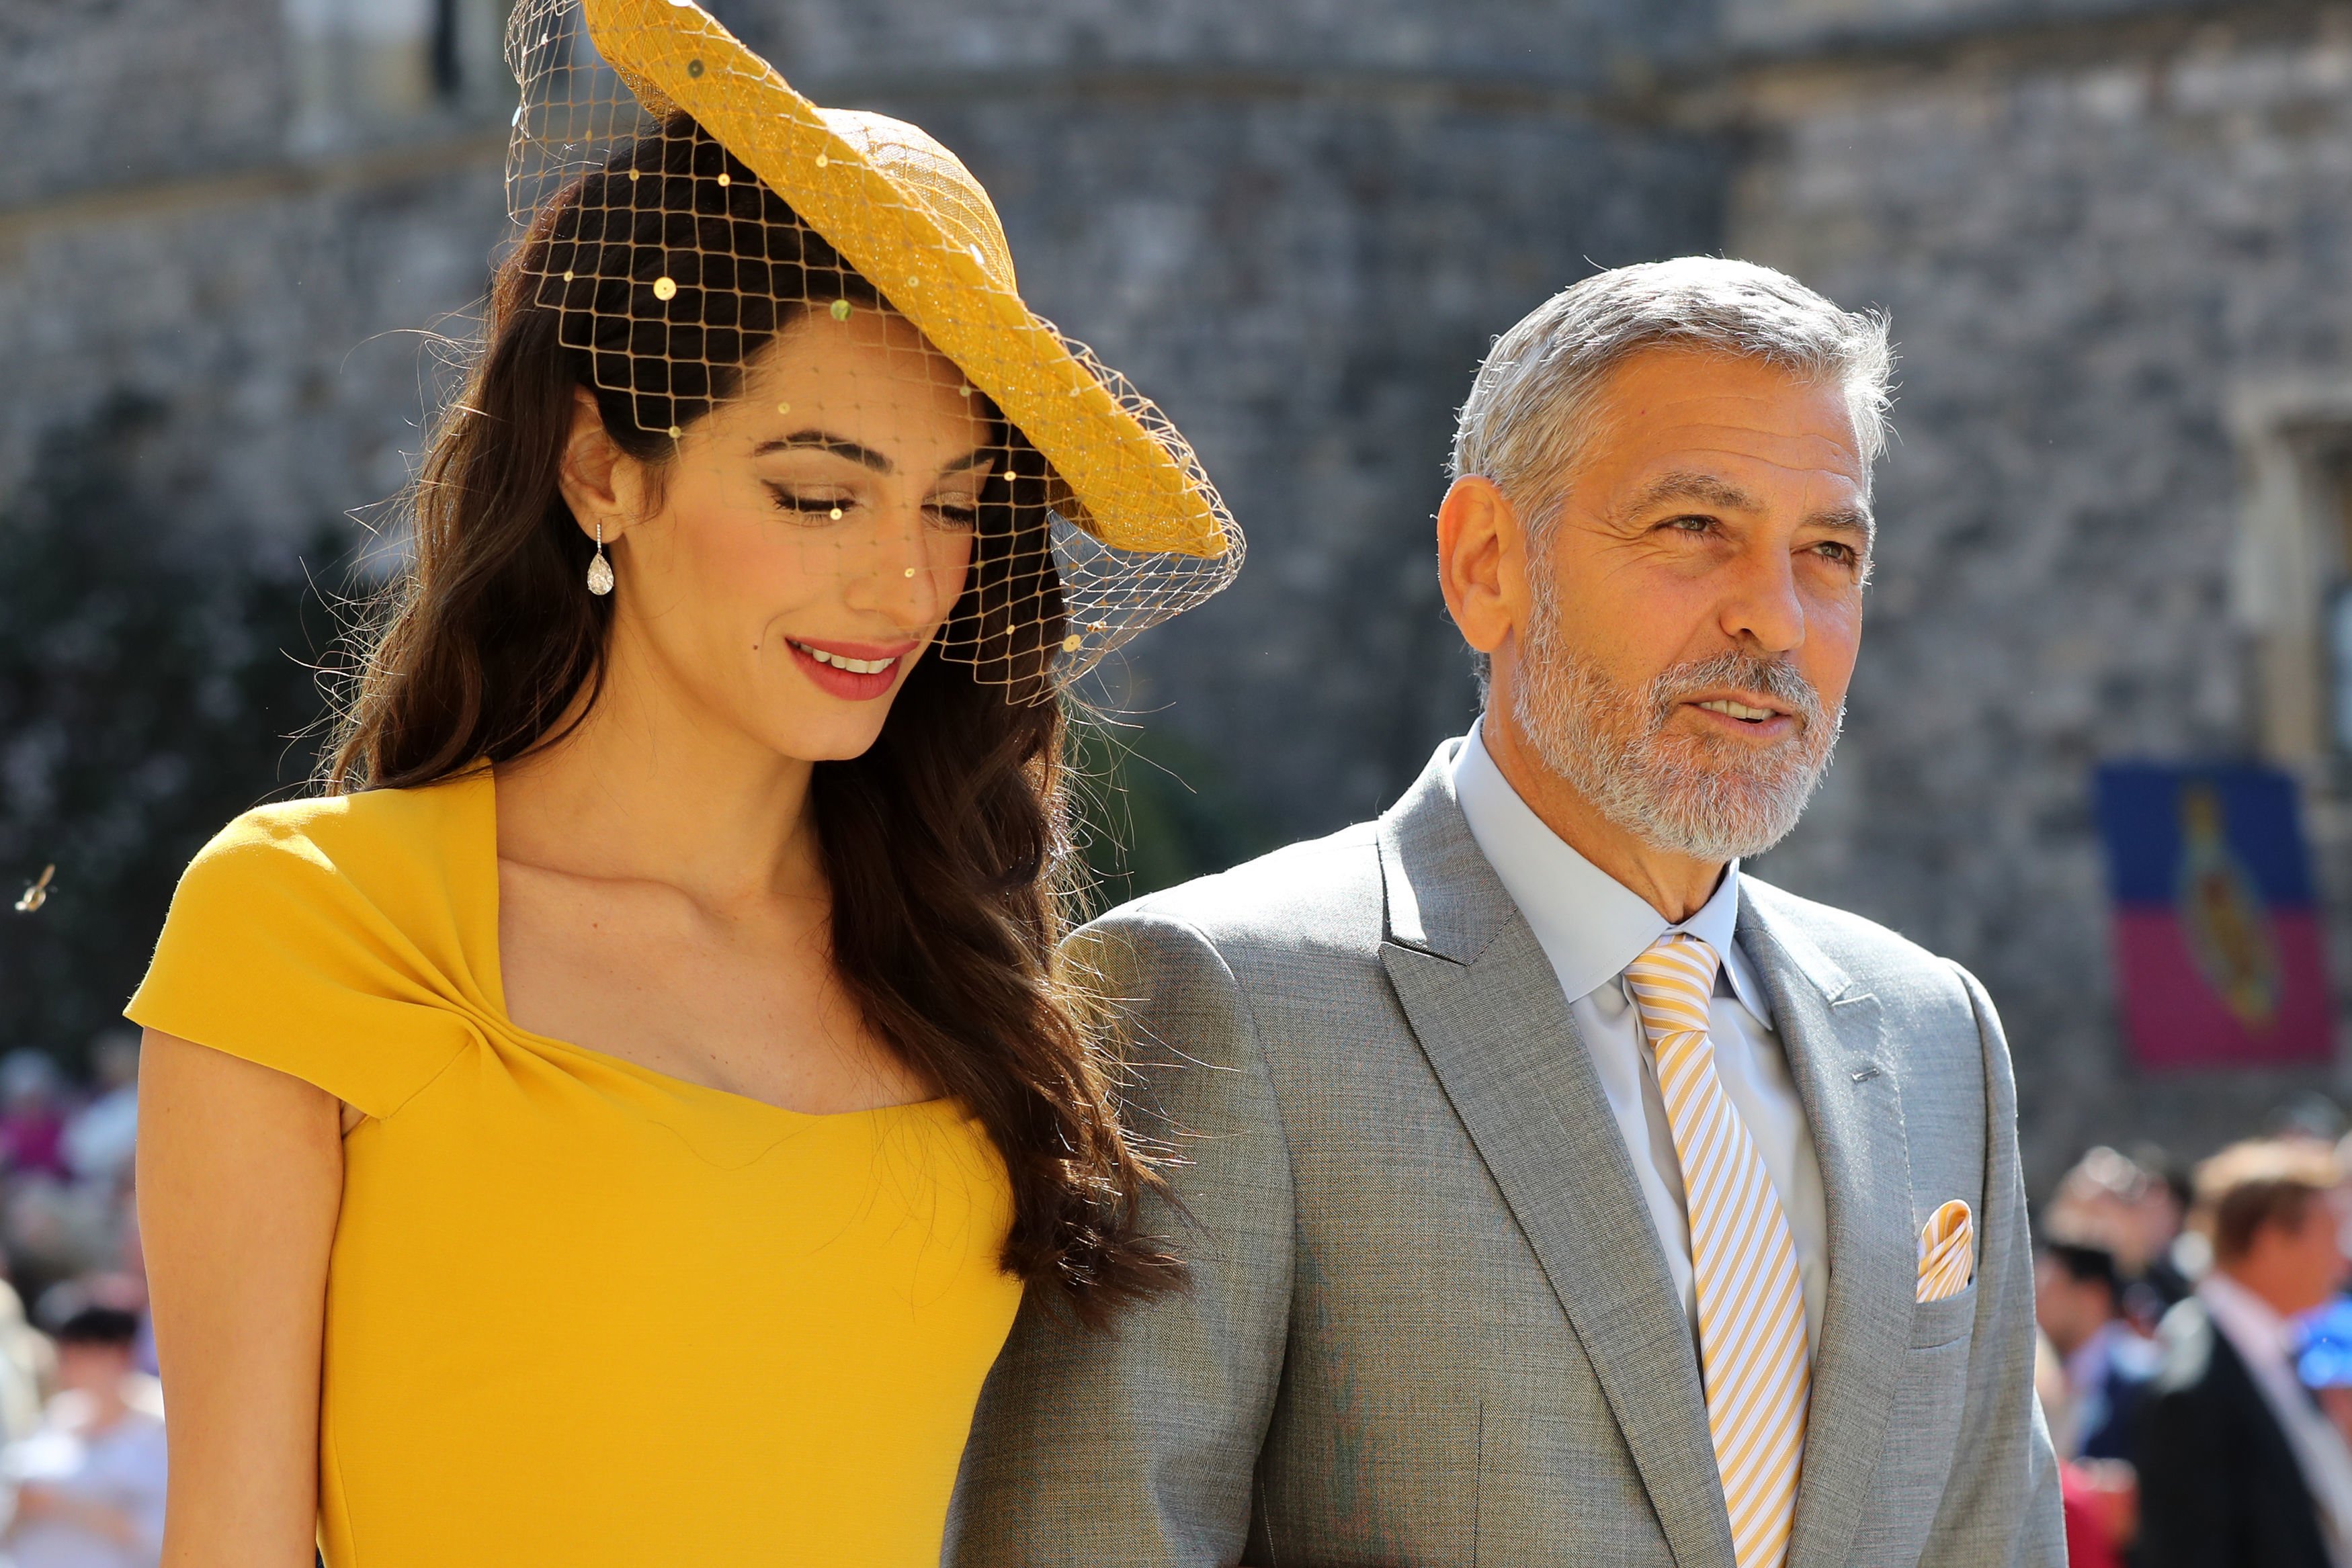 George and Amal Clooney attend the royal wedding of Prince Harry and Meghan Markle in April 2018 | Photo: Getty Images